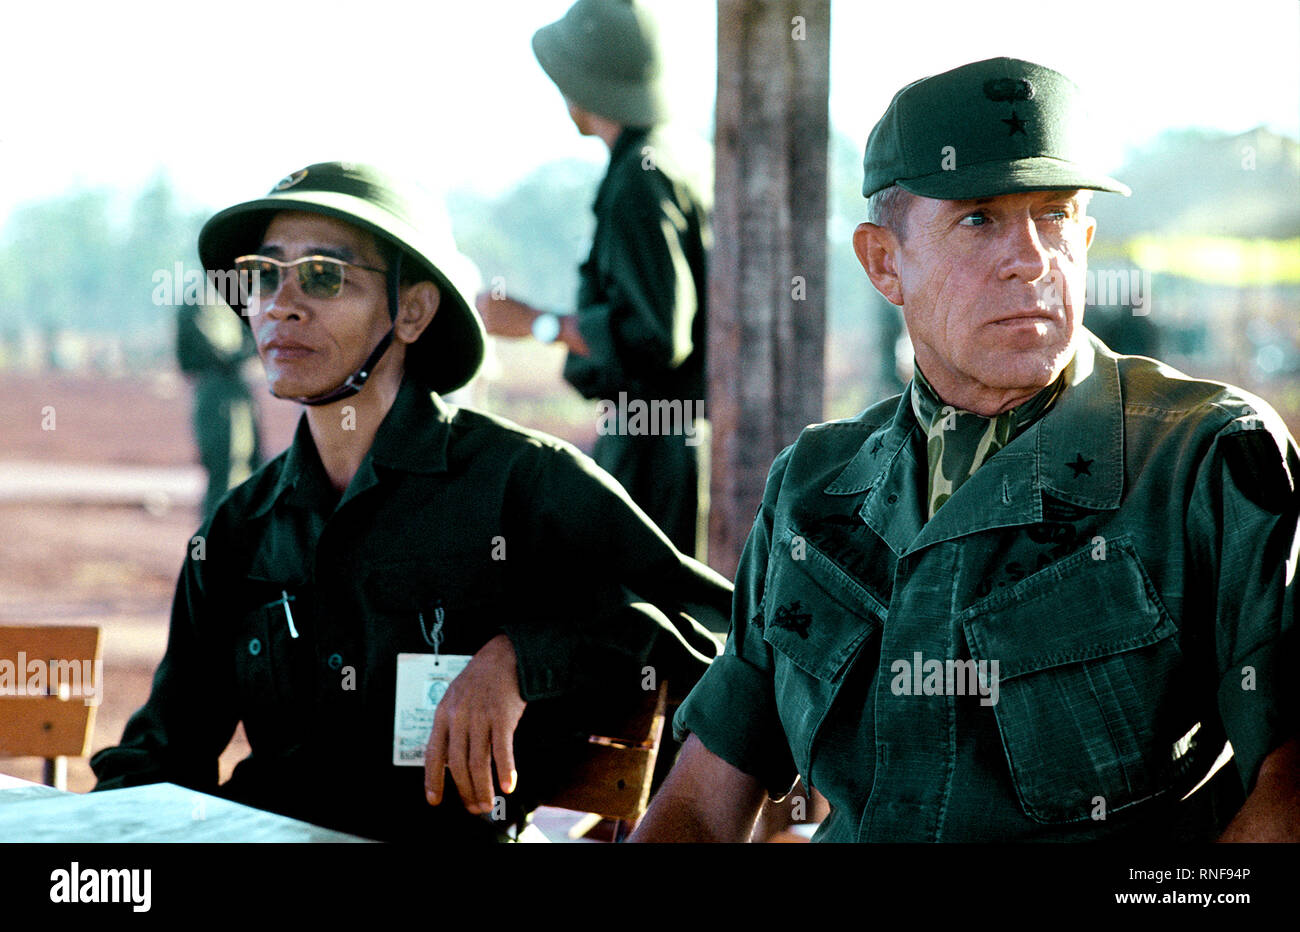 BGEN Stan McClellan, U.S. Army, Chief of Staff, Military Assistance Command - Vietnam (MACV)  discusses the pending exchange of American and South Vietnamese prisoners for Viet Cong (VC) and North Vietnamese (NVA)prisoners with Viet Cong officer. Stock Photo